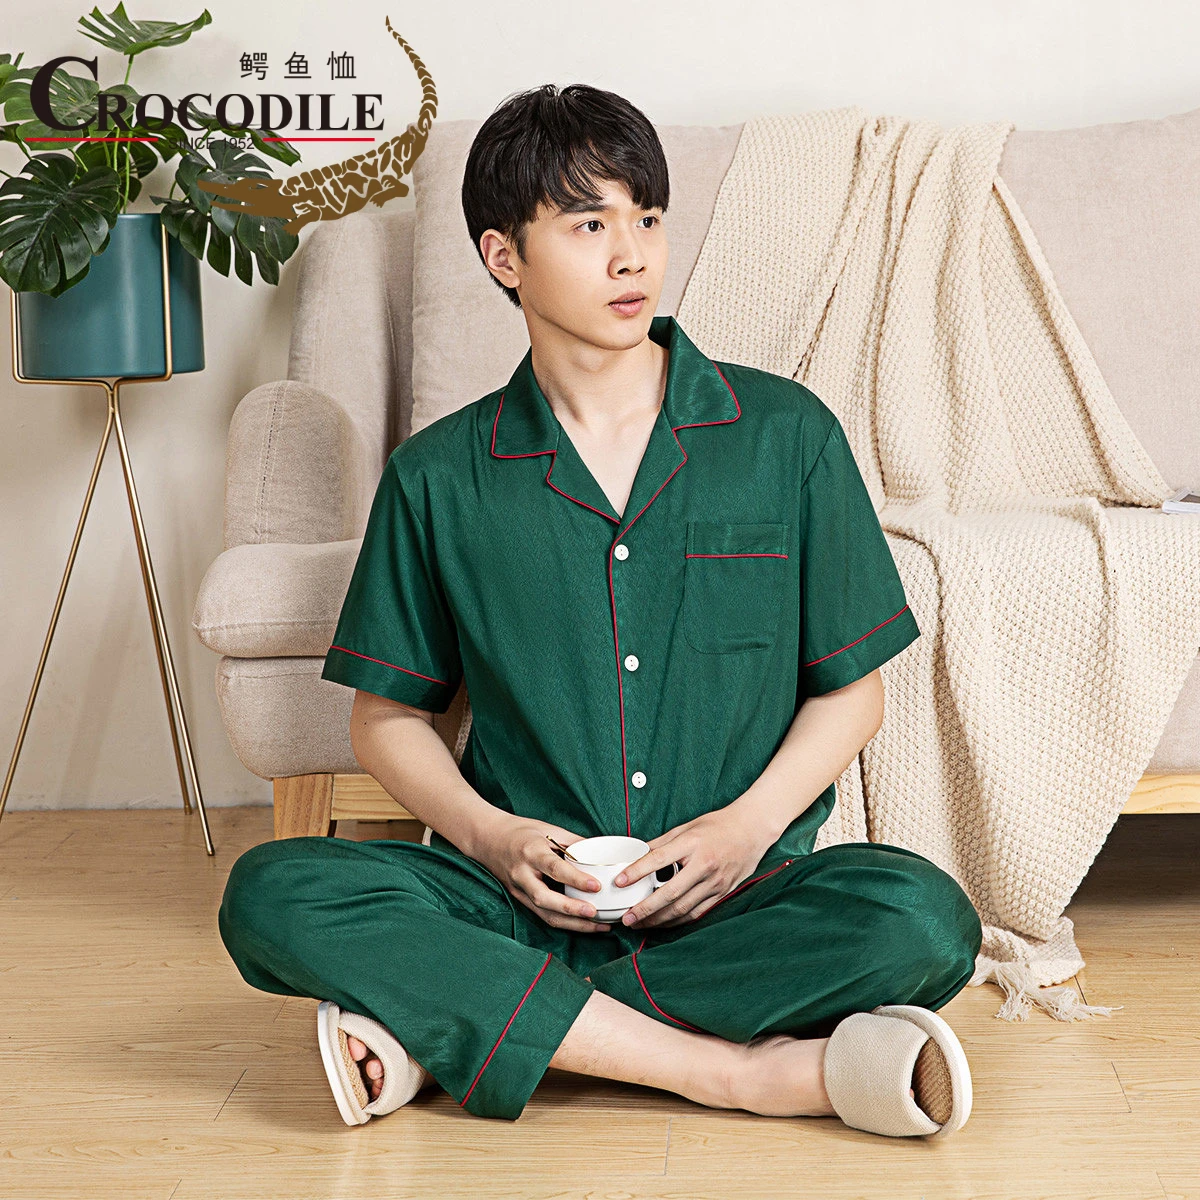 Crocodile 2023 Early Spring Newest Satin Chiffon Cool Comfortable Men's pajamas Loose Breathable Two Colors Sleepwear For Men